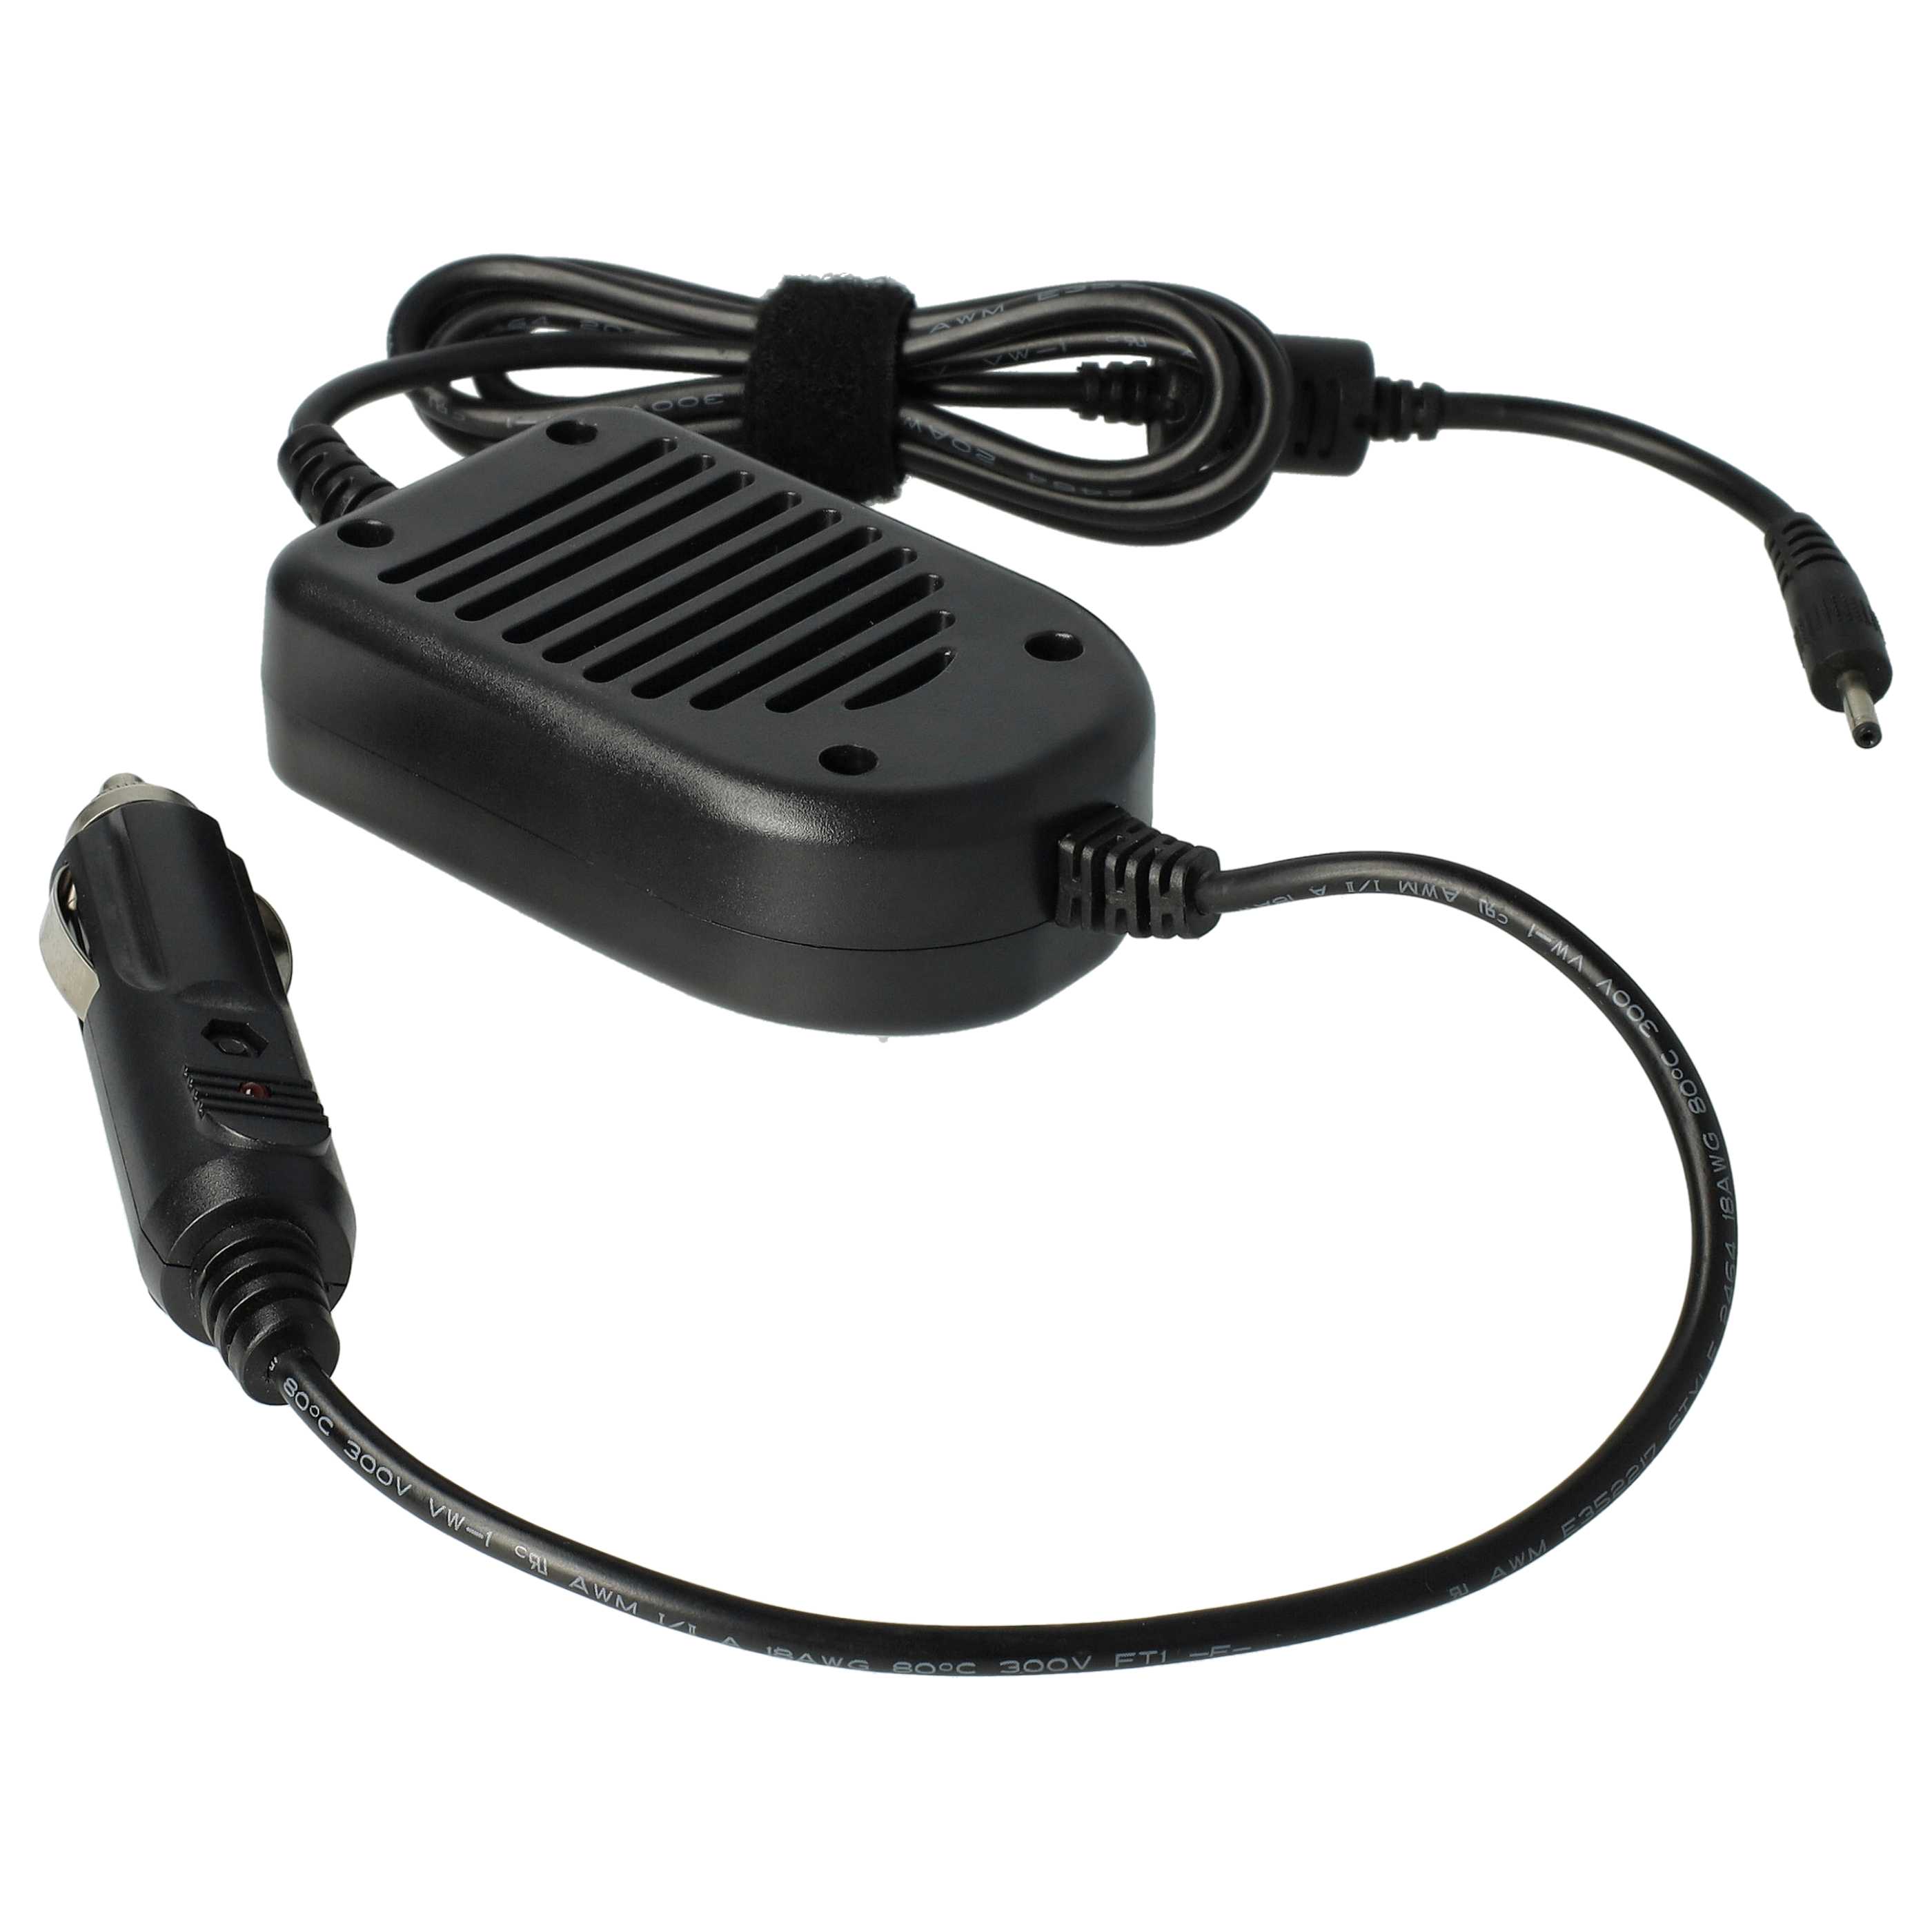 Chargeur auto remplace Samsung AA-PA2N40L, AA-PA3NS40/US, AA-PA2N40S, AD-4019 pour ordinateur portable - 2,1 A